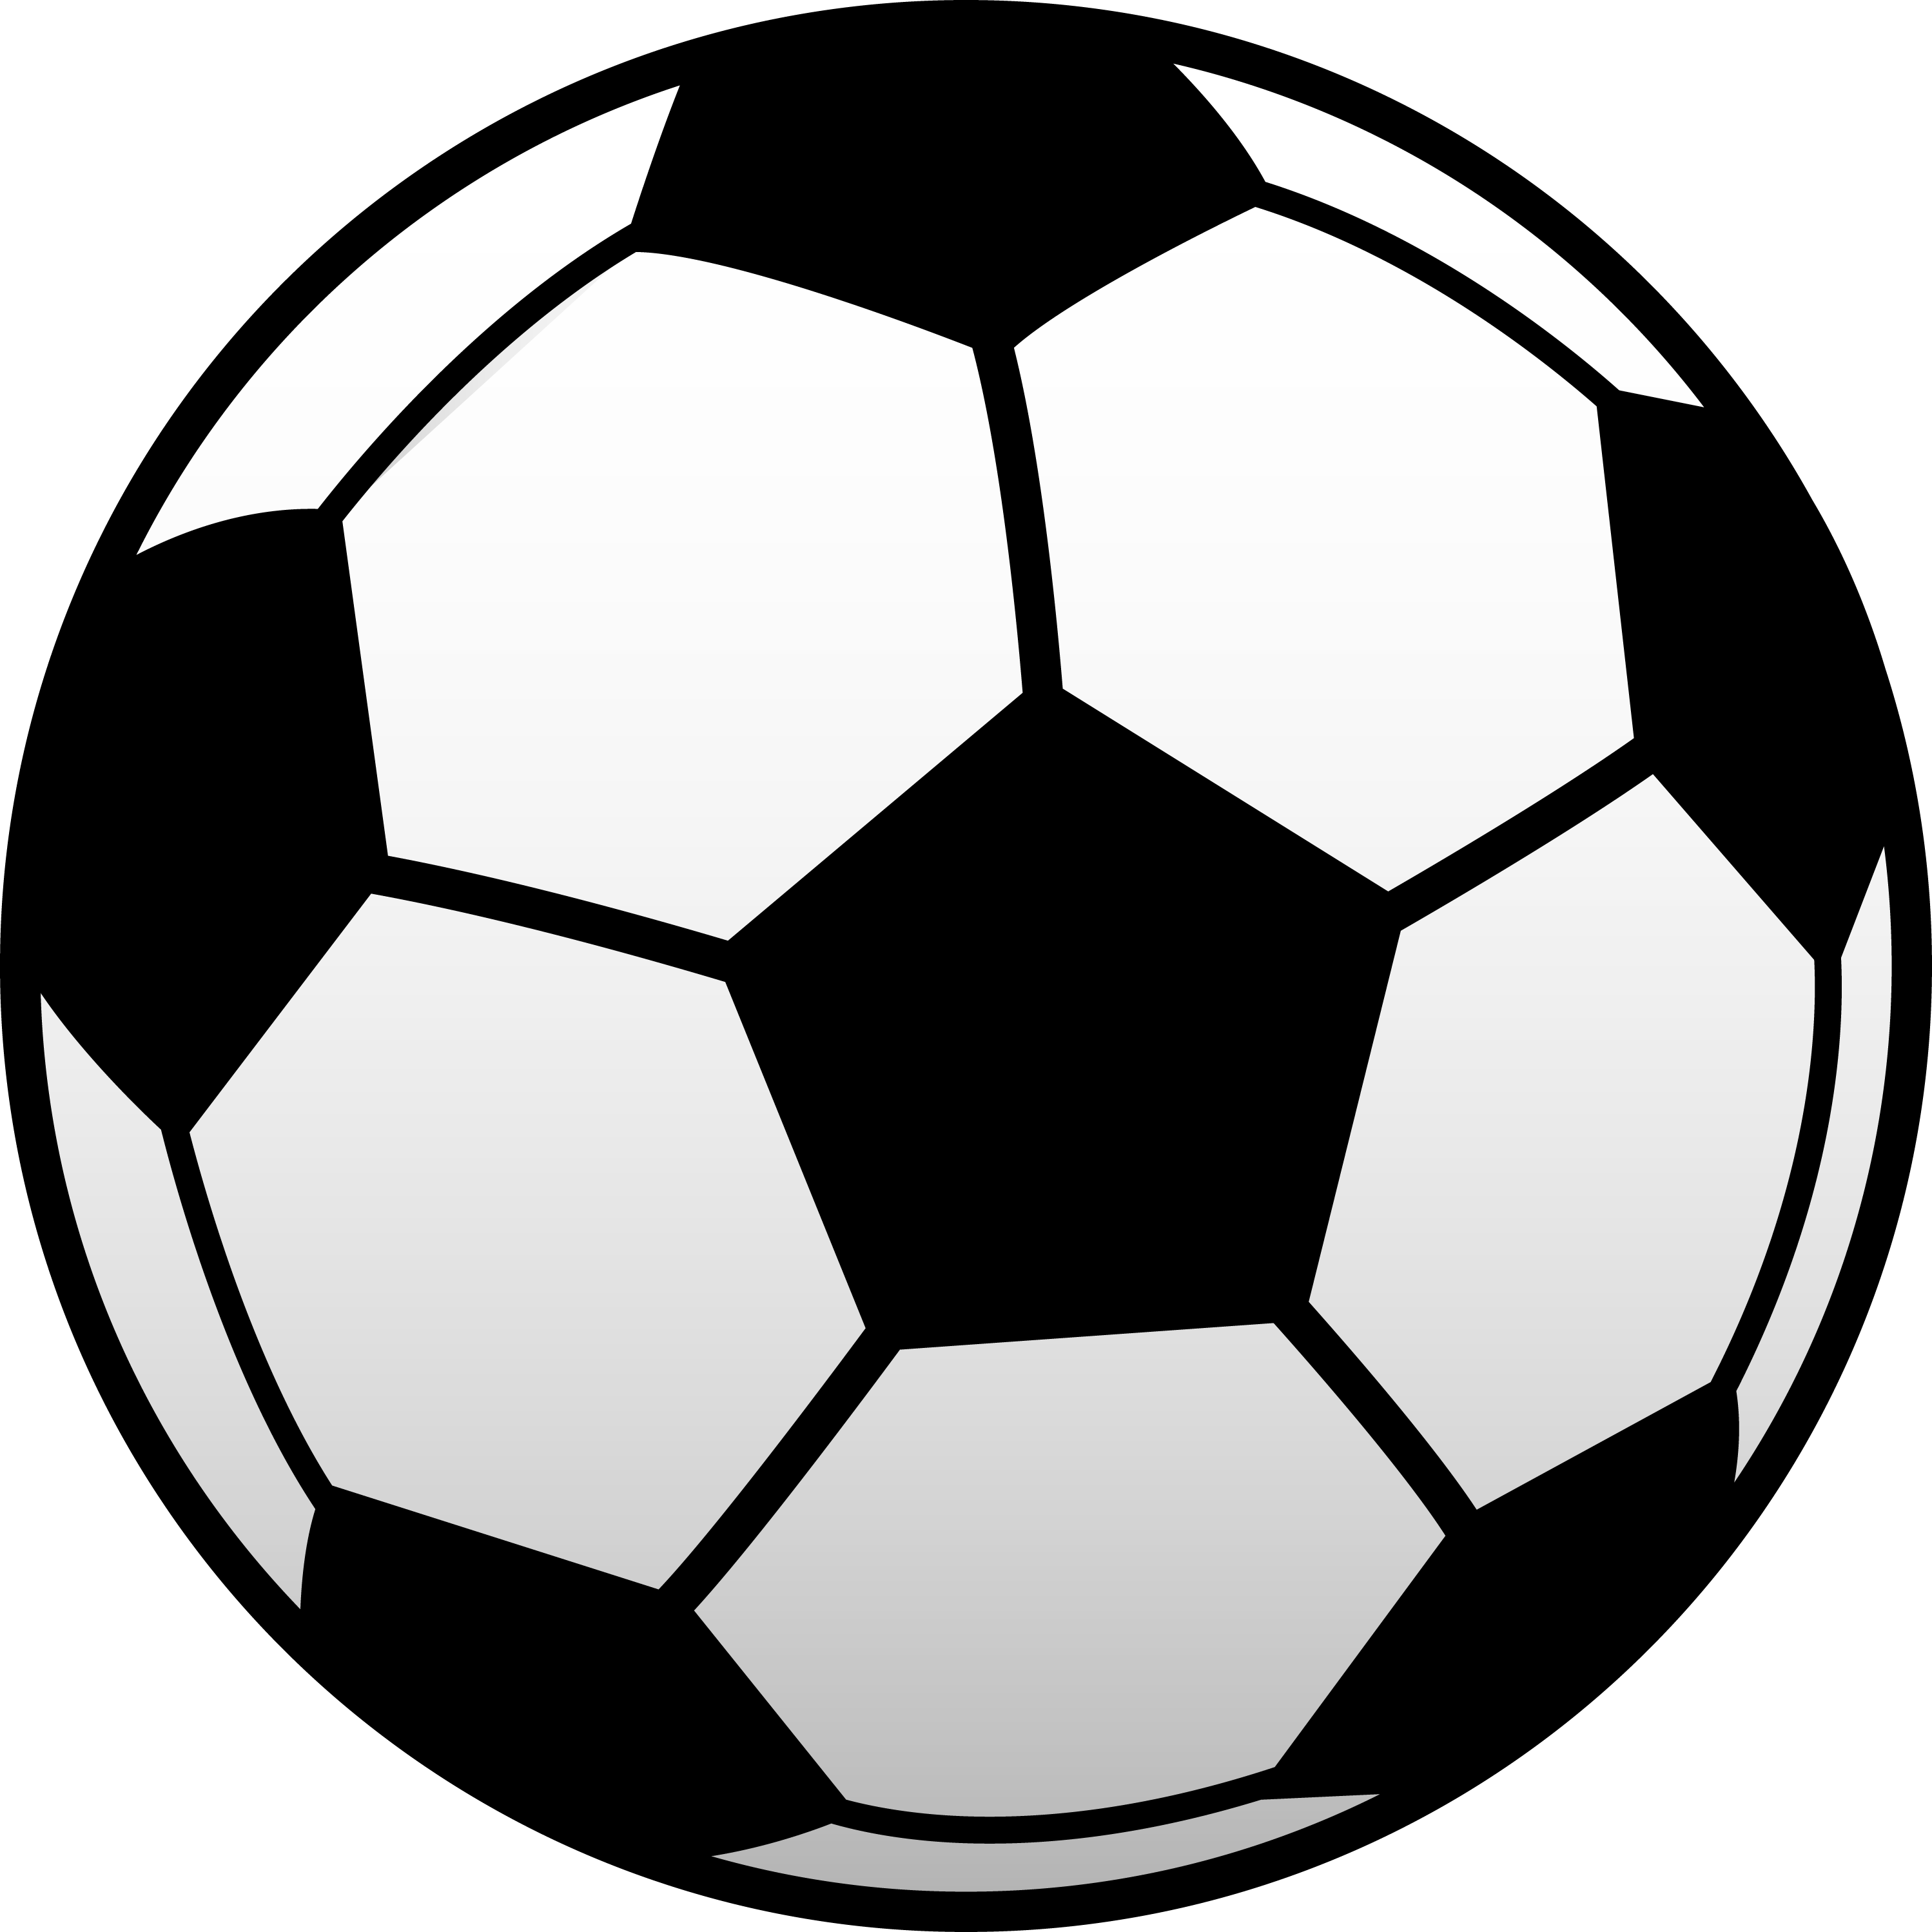 Soccer ball clipart free clipart images 3